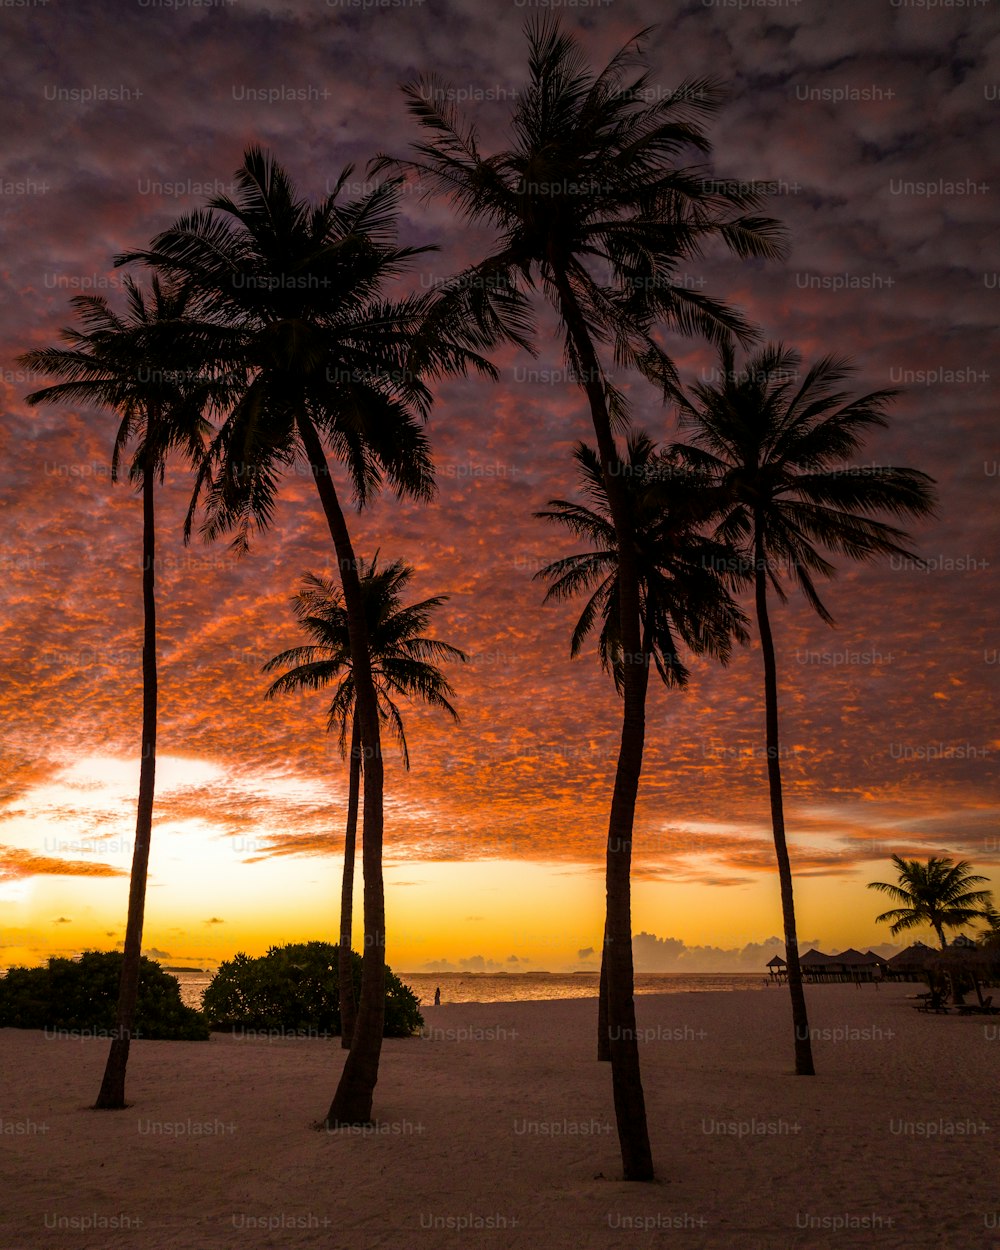 three palm trees on a beach with a sunset in the background